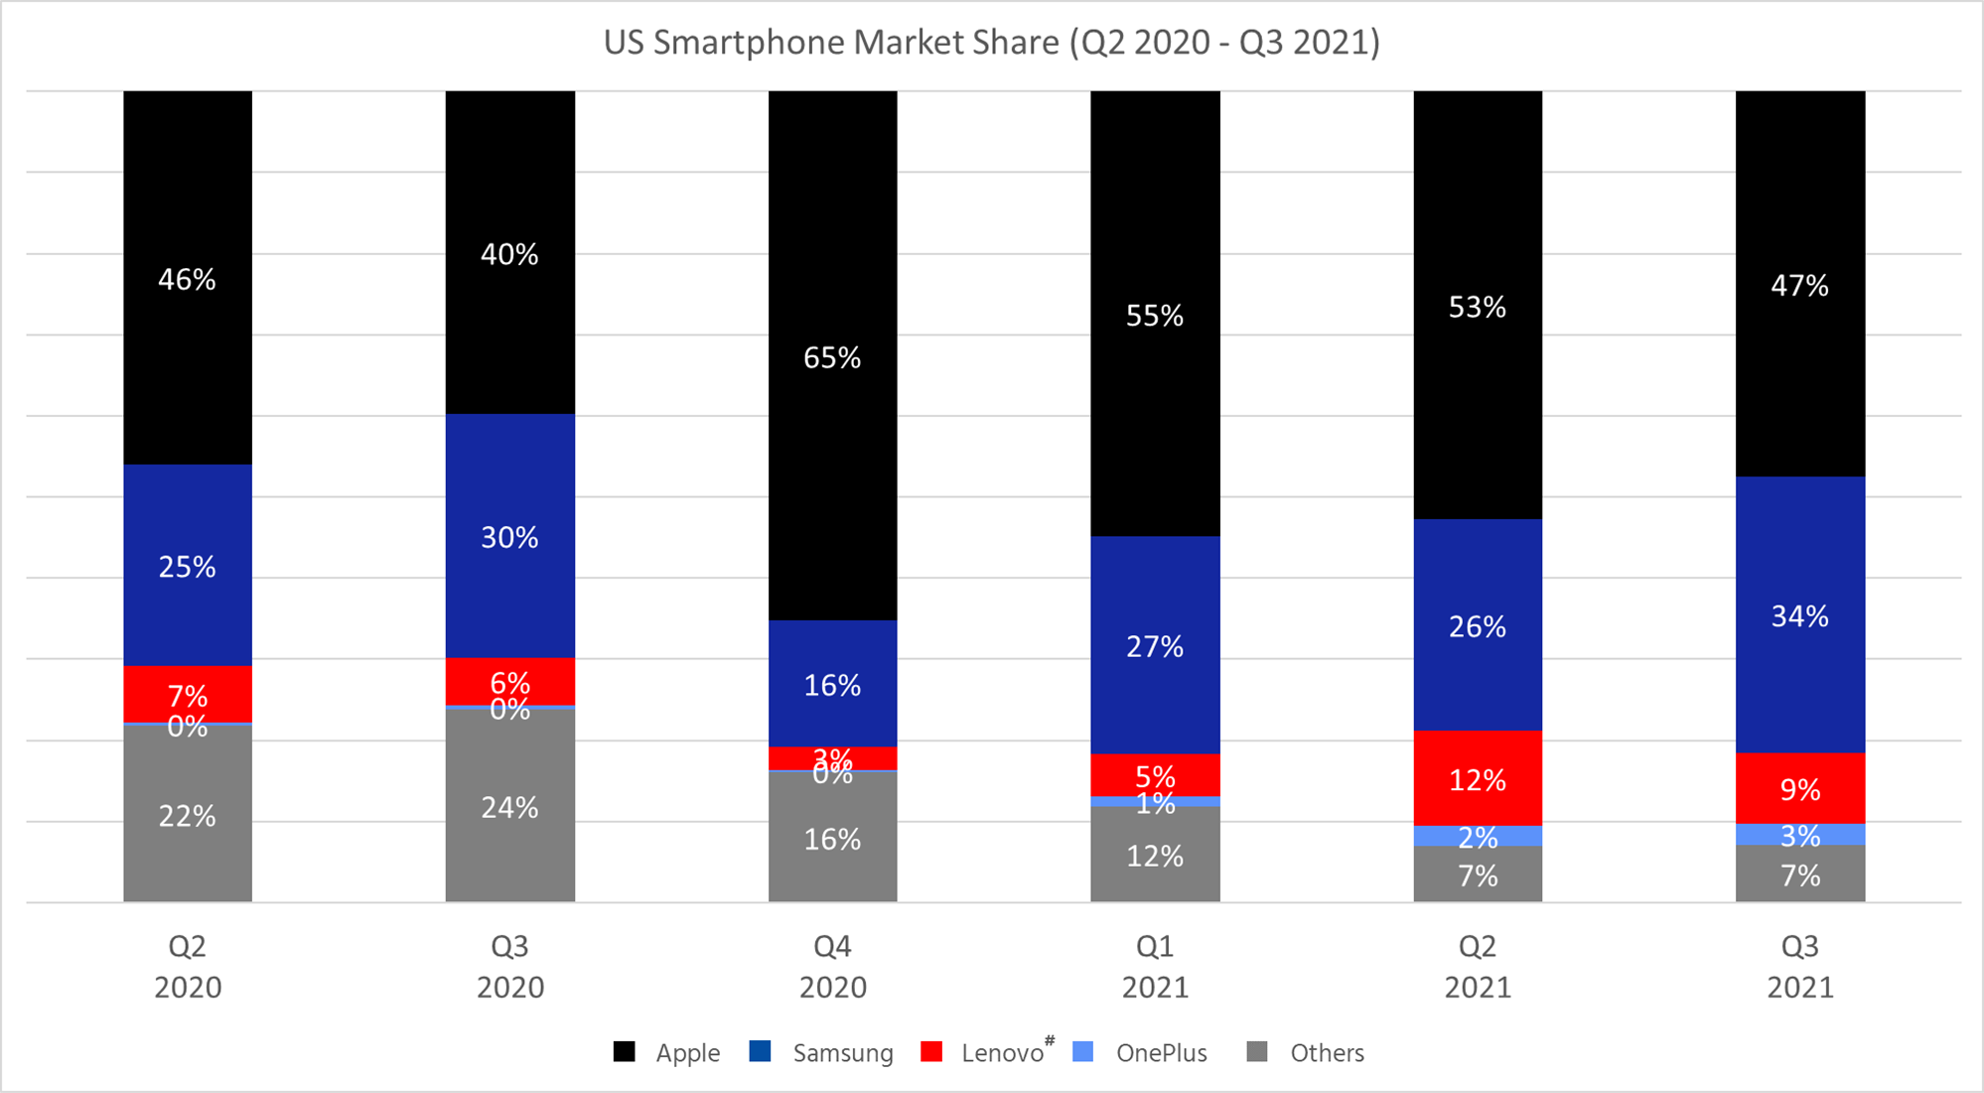 Counterpoint Research USA Smartphone Market Research Q3 2021